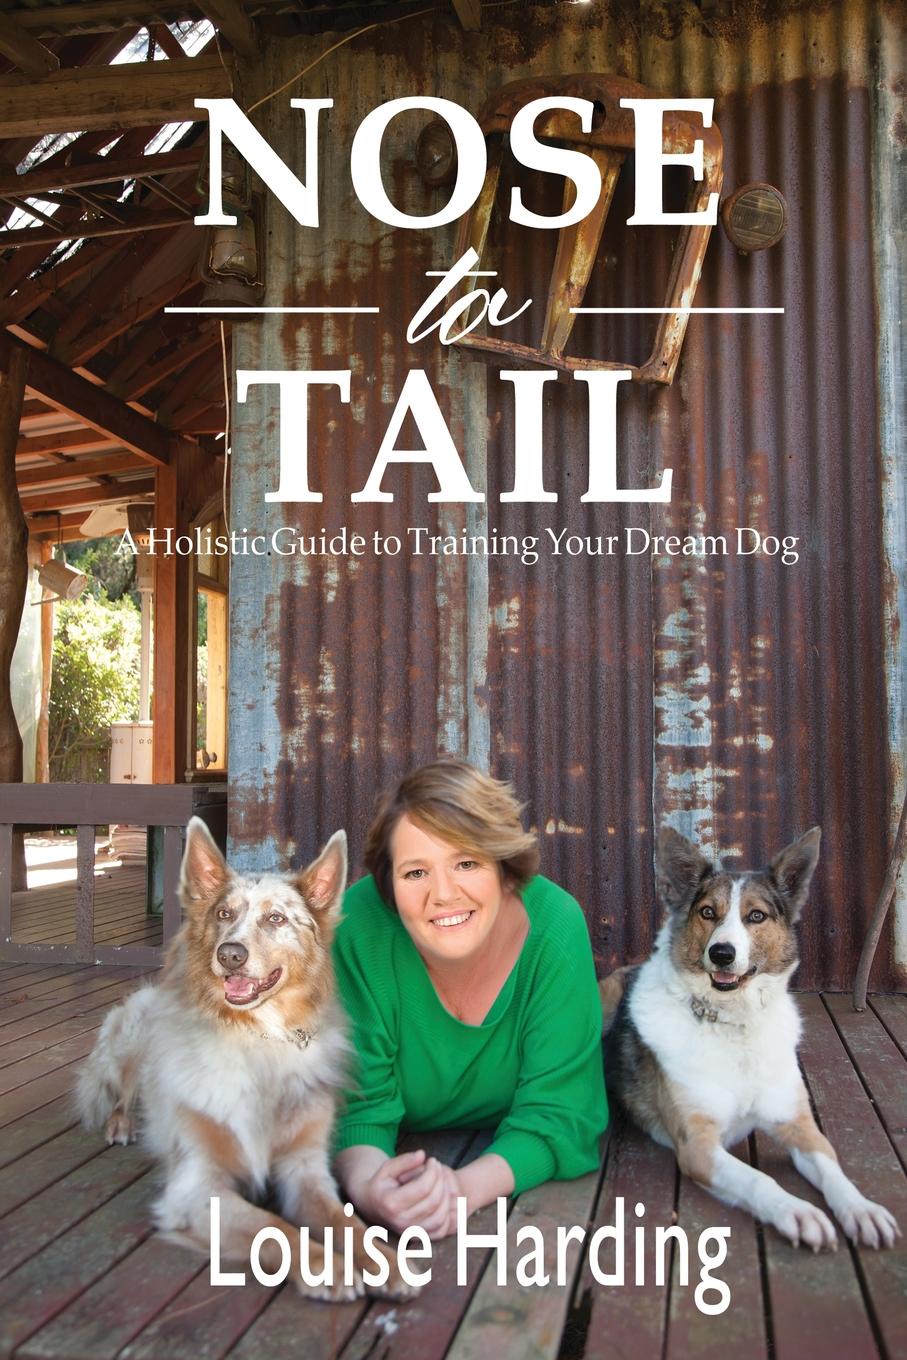 Nose to Tail. A Holistic Guide to Training Your Dream Dog